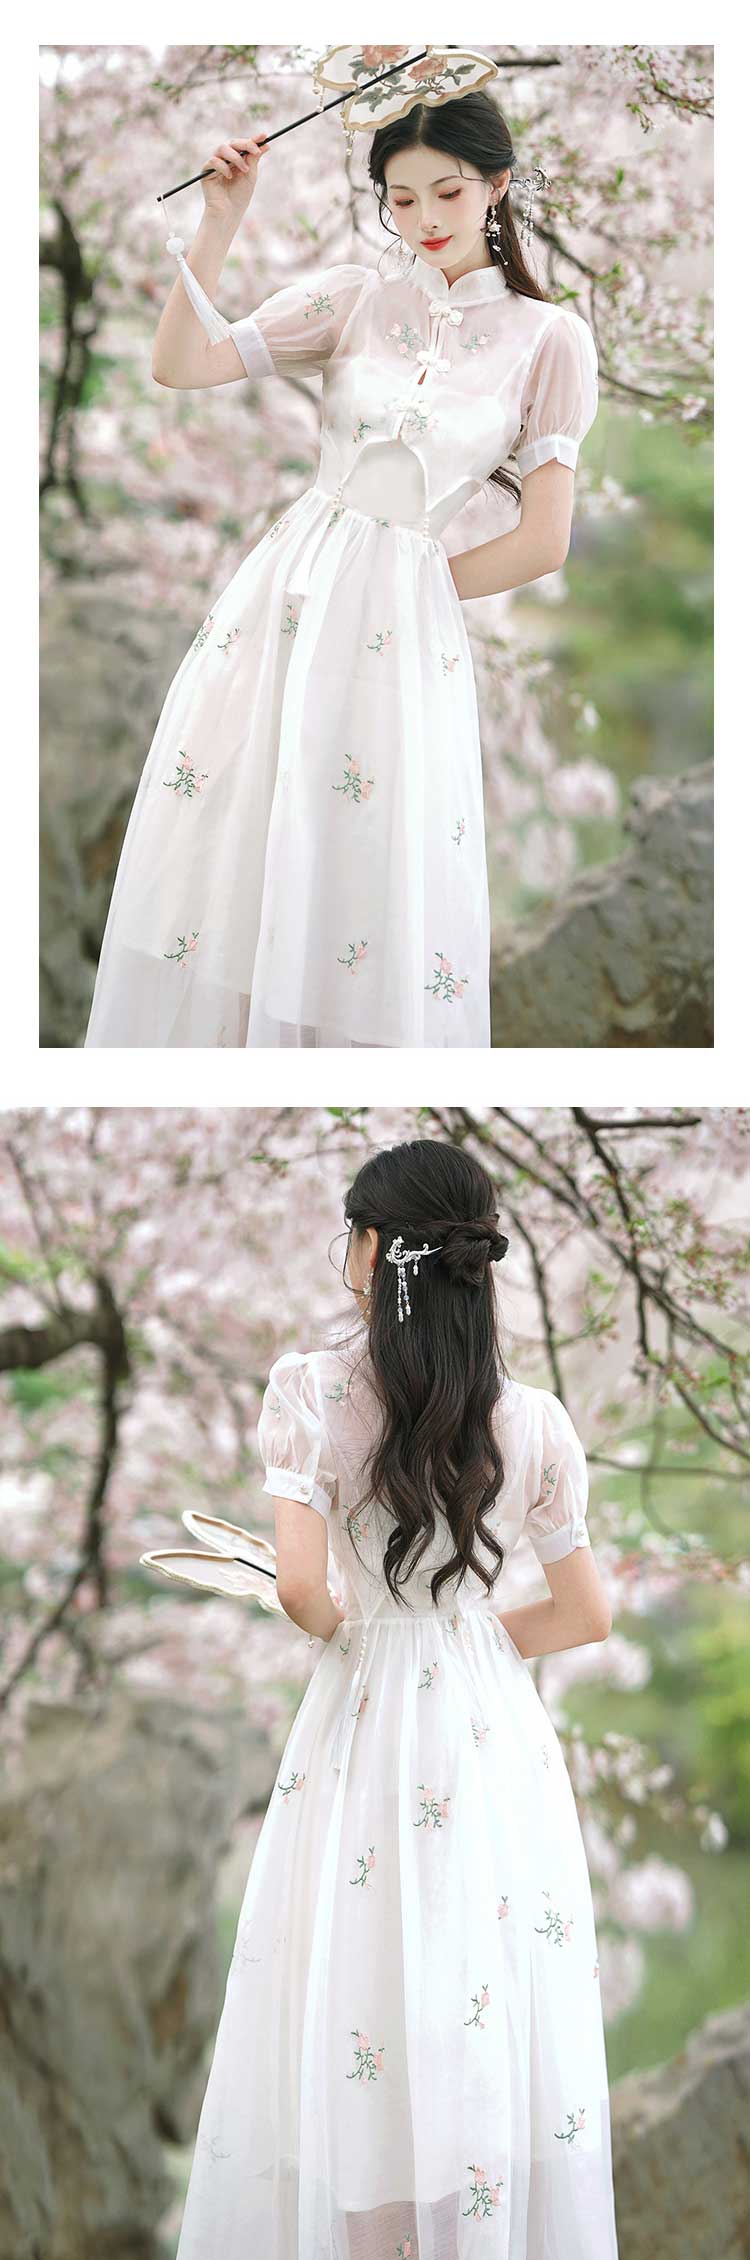 Women-Embroidery-Short-Sleeve-Casual-White-Summer-Maxi-Dress11